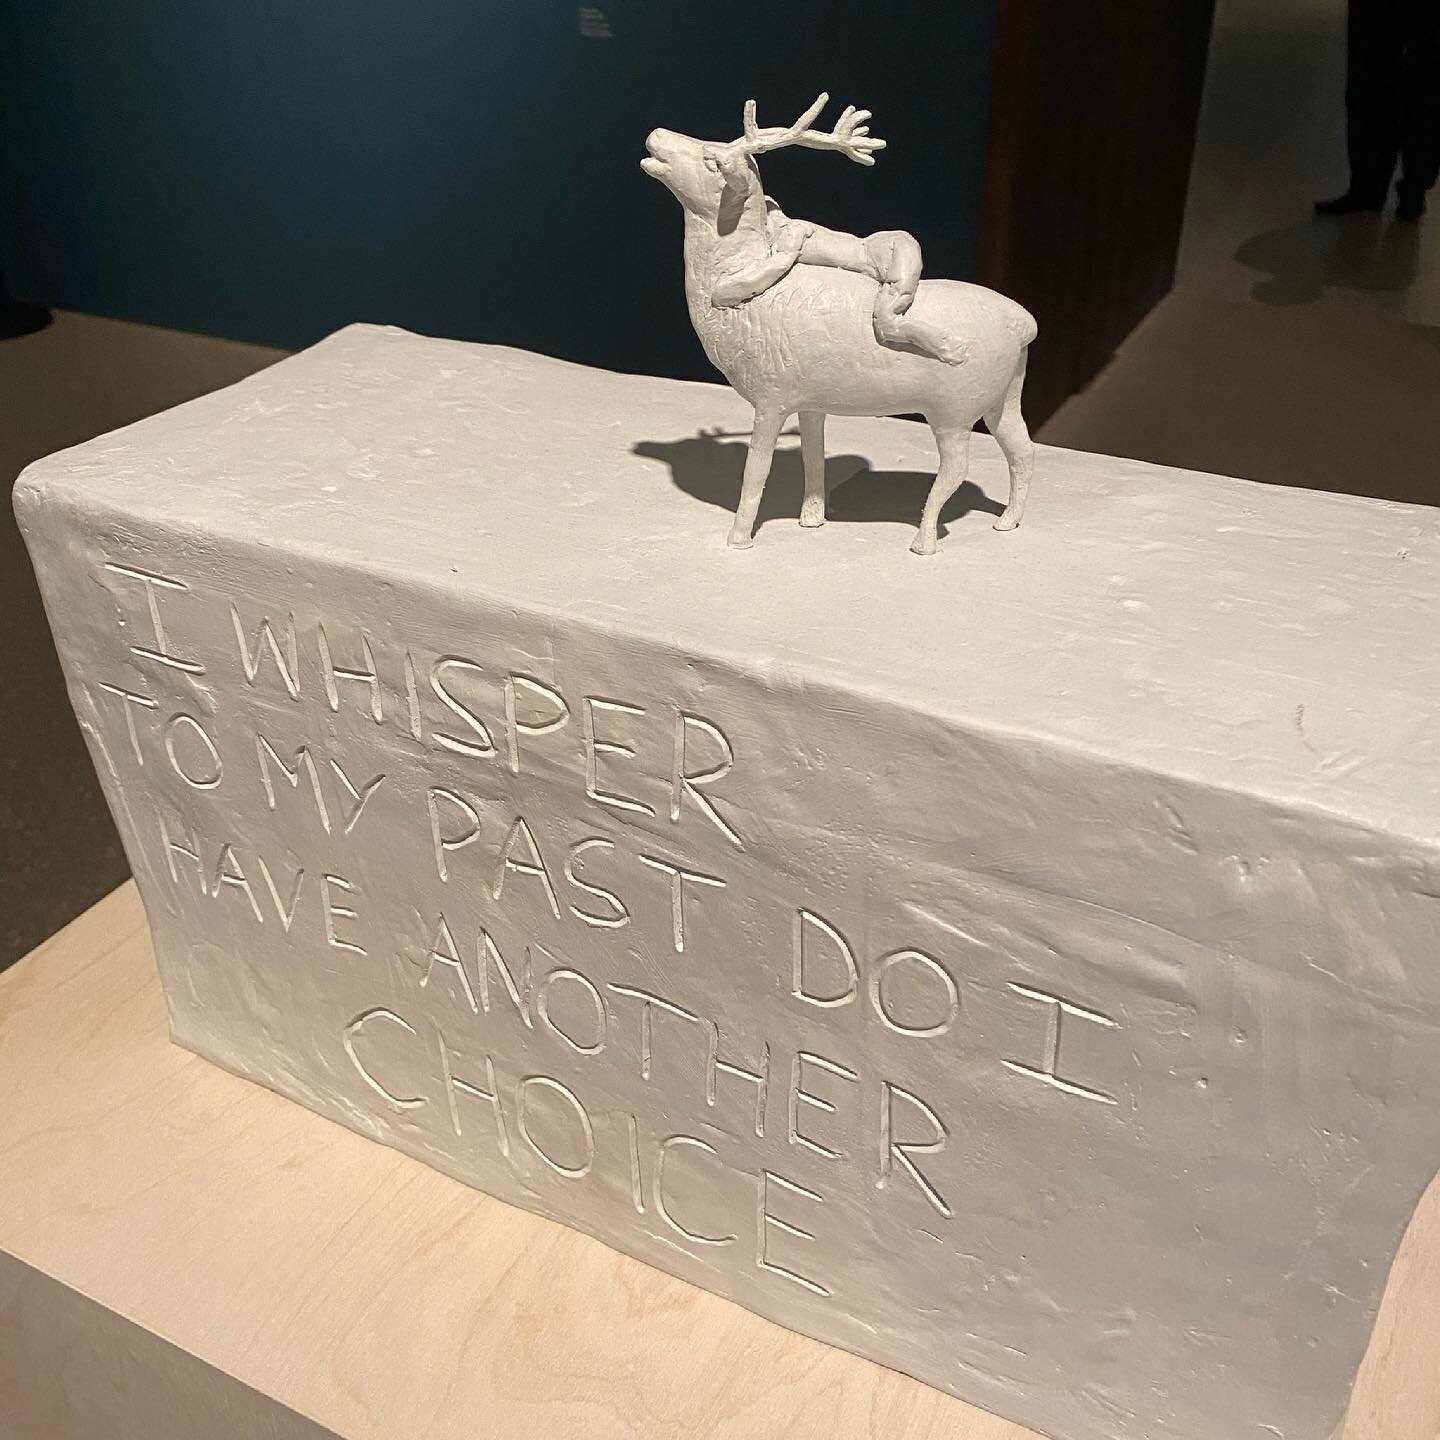 Today&rsquo;s inspiration was Tracey Emin&rsquo;s gut-punching work at @royalacademyarts. Such a privilege to witness her work in person! 

I&rsquo;ve been quiet on the playing front recently as I&rsquo;ve been incredibly busy preparing for numerous 